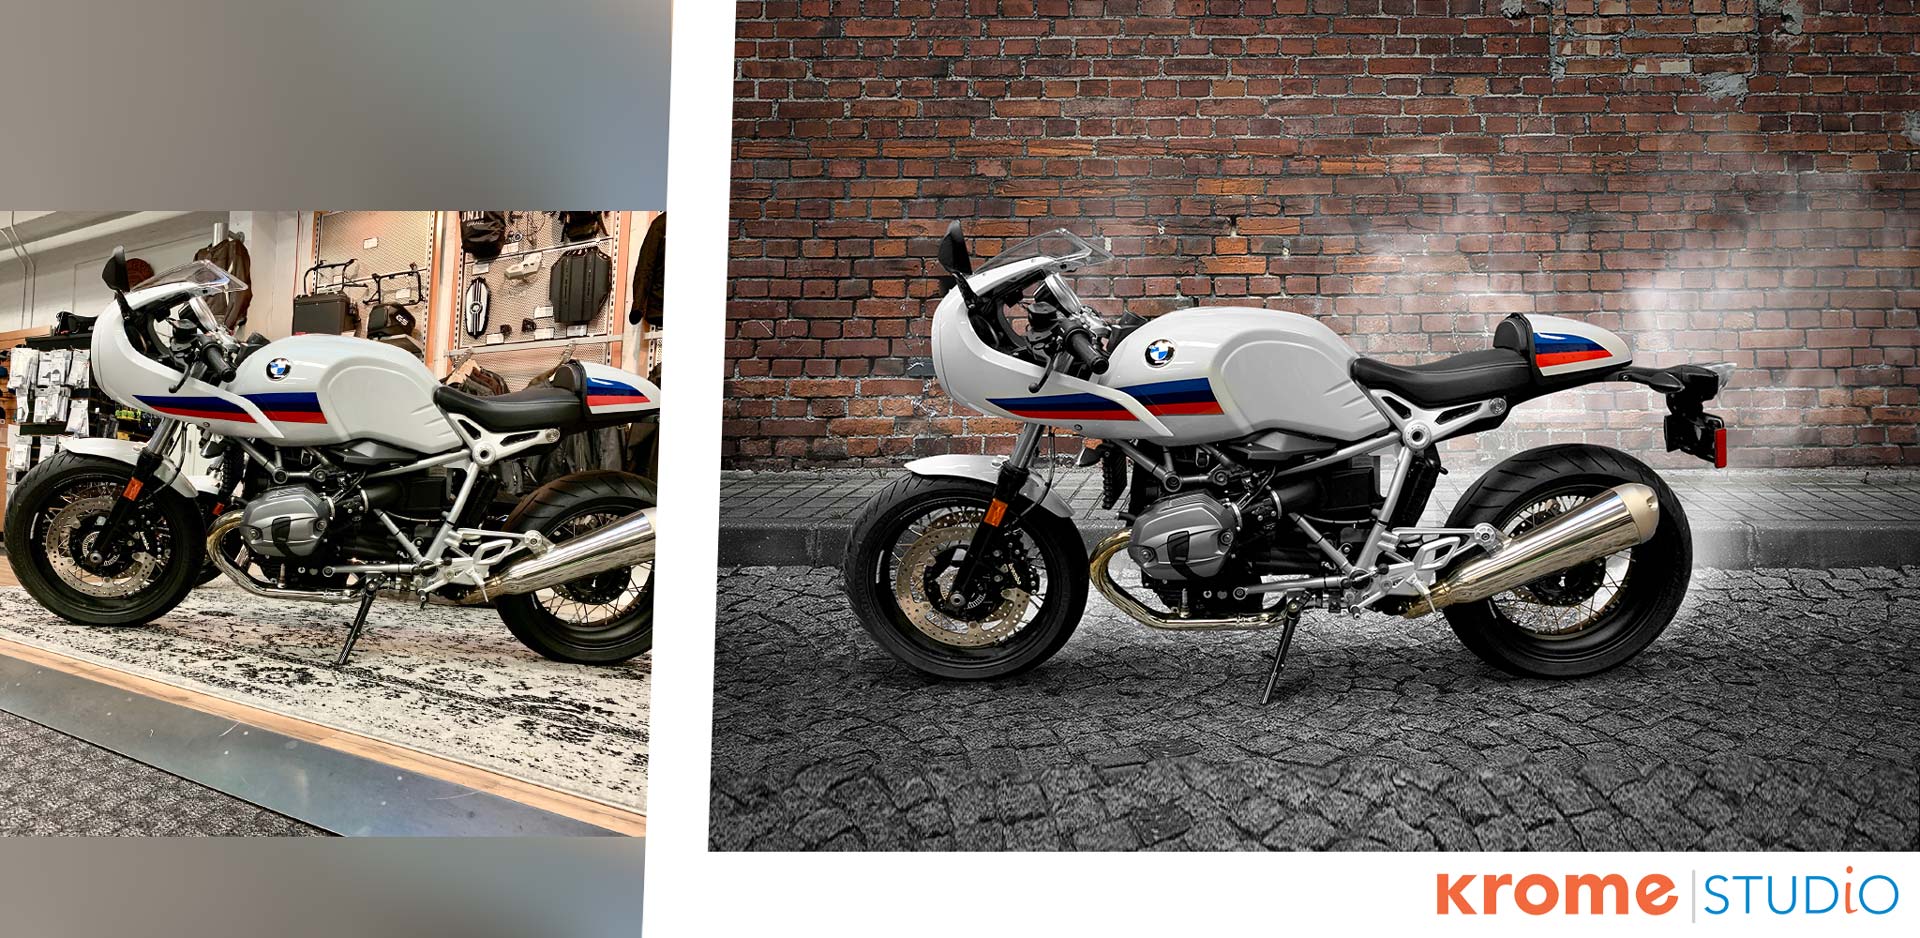 Amazon Product Photo example - before and after image of a motorcycle with a cool background. 